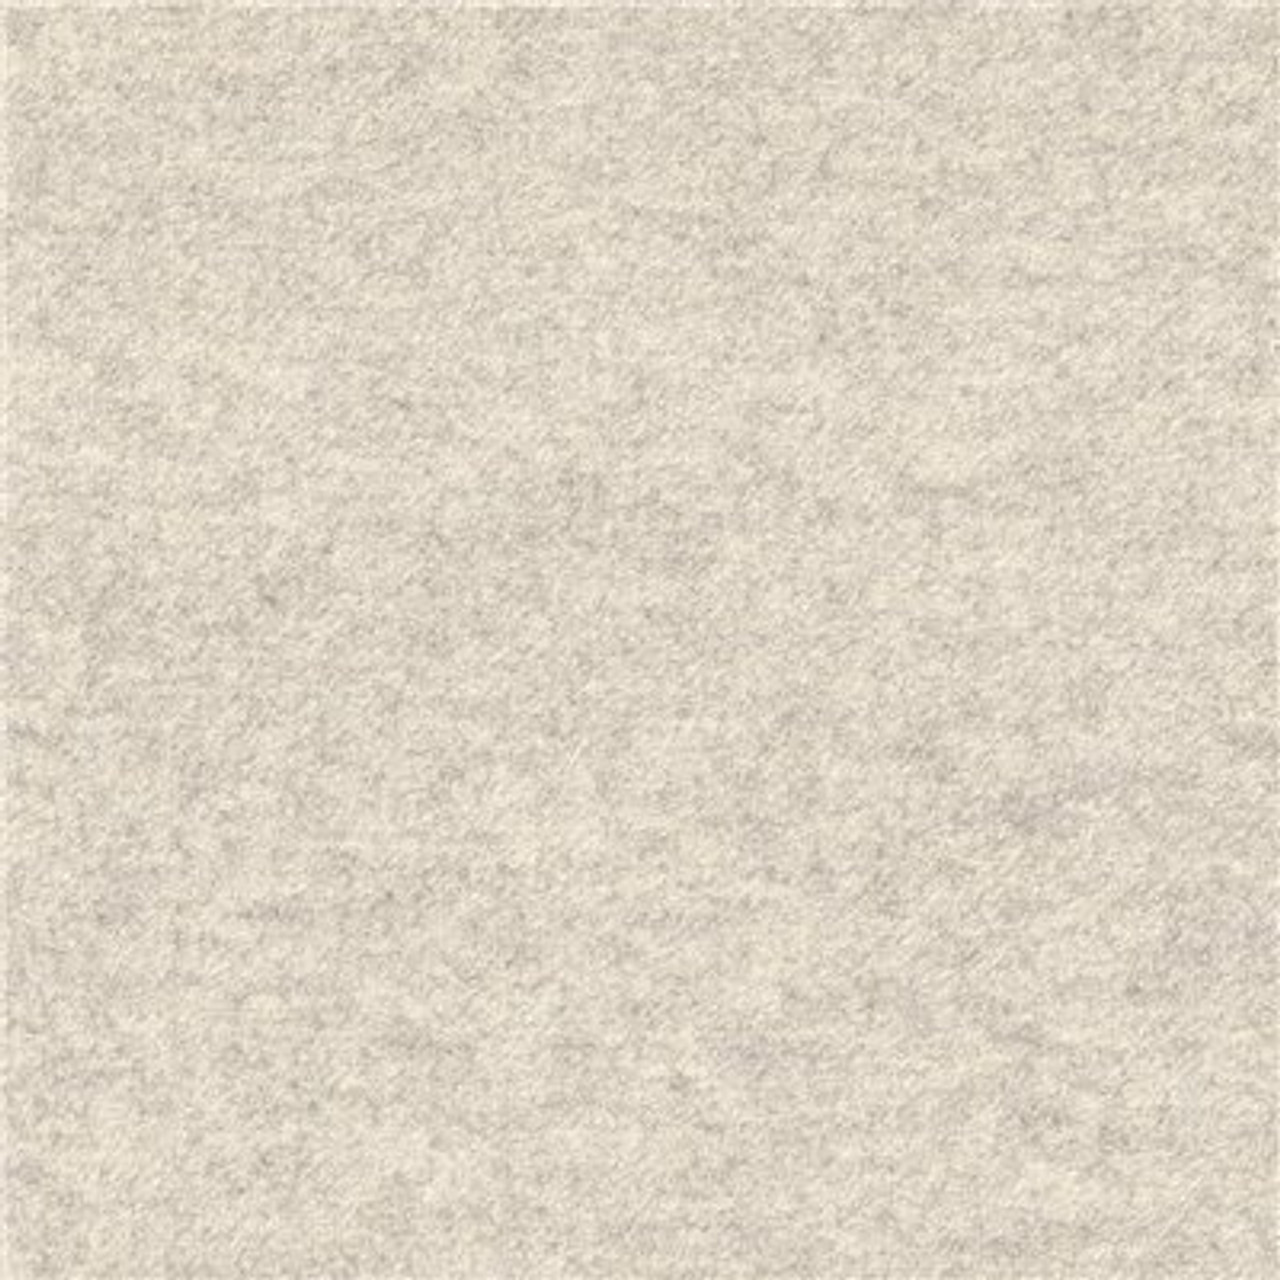 Foss Peel And Stick First Impressions Flat Oatmeal 24 In. X 24 In. Commercial Carpet Tile (15 Tiles/Case)